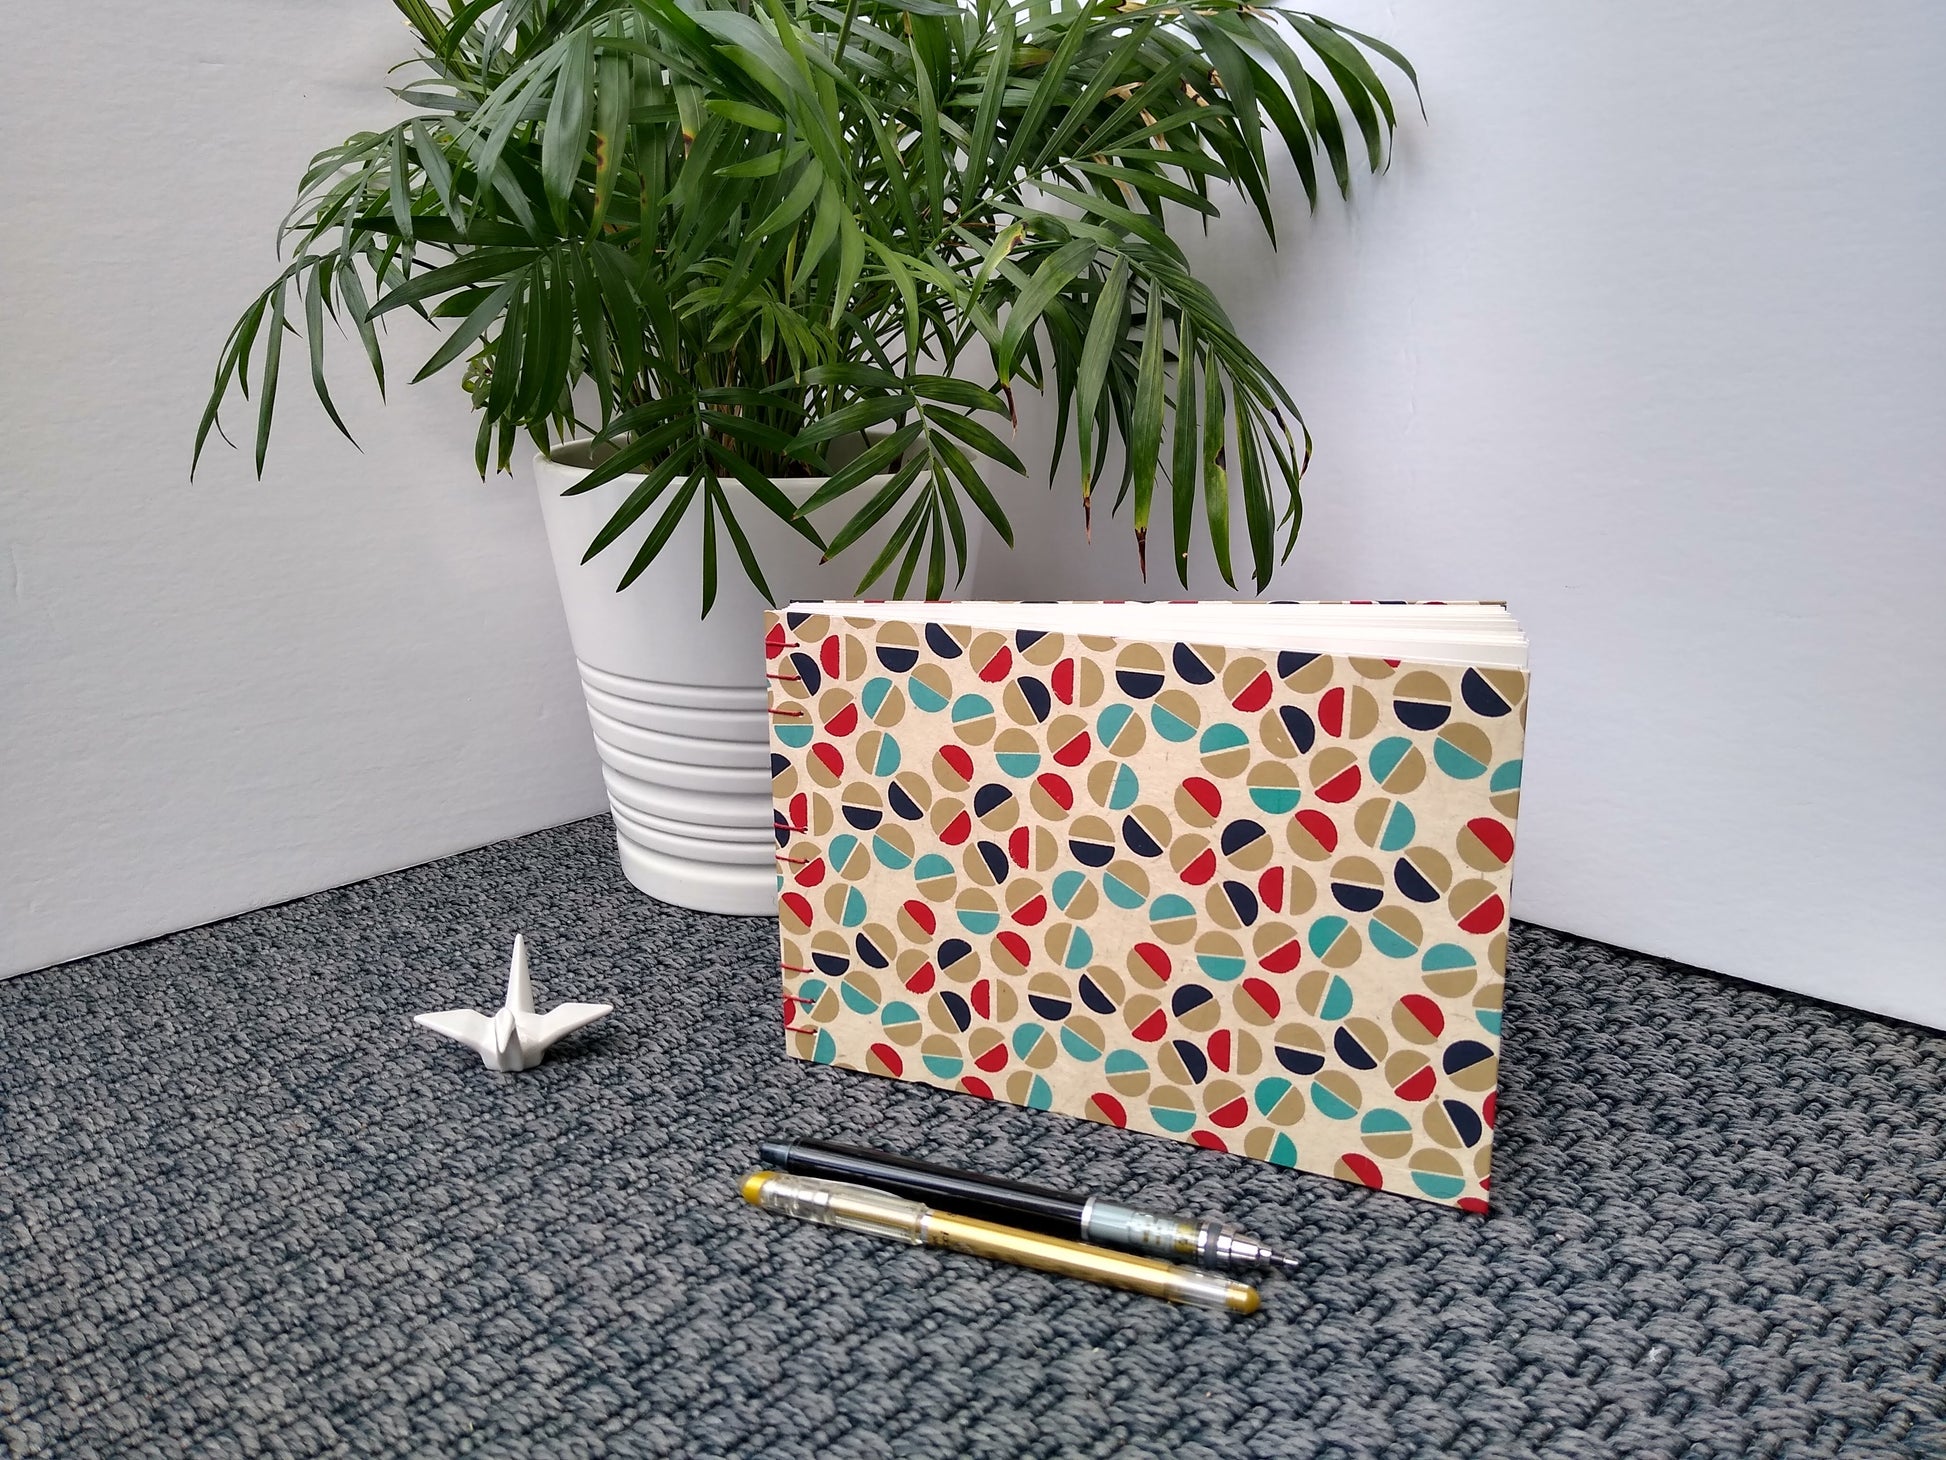 A handmade journal sits upright beside a potted plant, a ceramic crane, a gold pen, and a black mechanical pencil. The cover of the journal is cream with half circles in gold, teal, dark blue, and red all over it. The half circles are placed next to each other to look like the head of a flat-head screw.